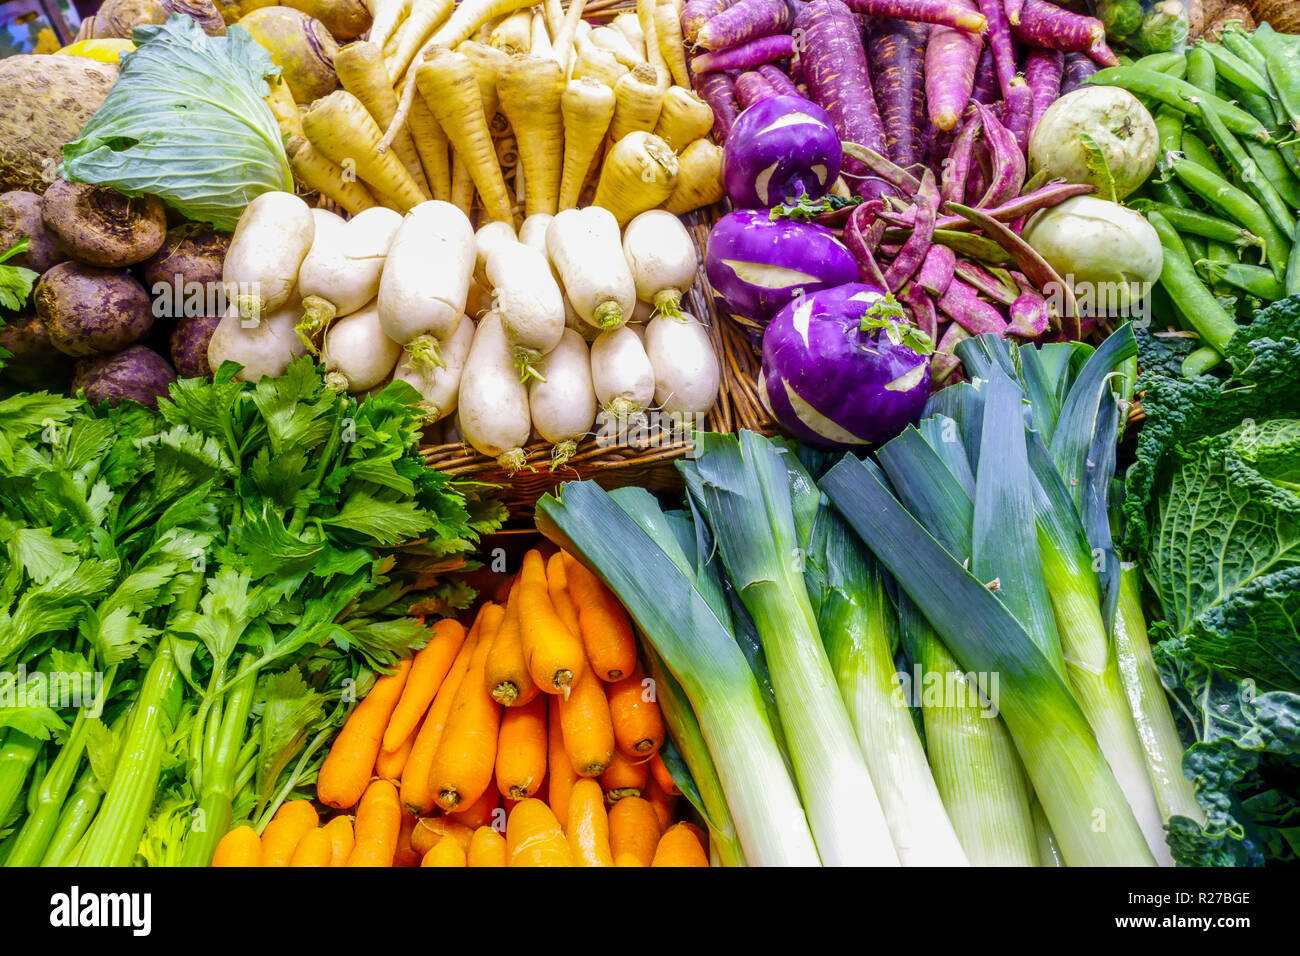 Fresh vegetable market stall variety of roots vegetables, Alicante Spain Stock Photo